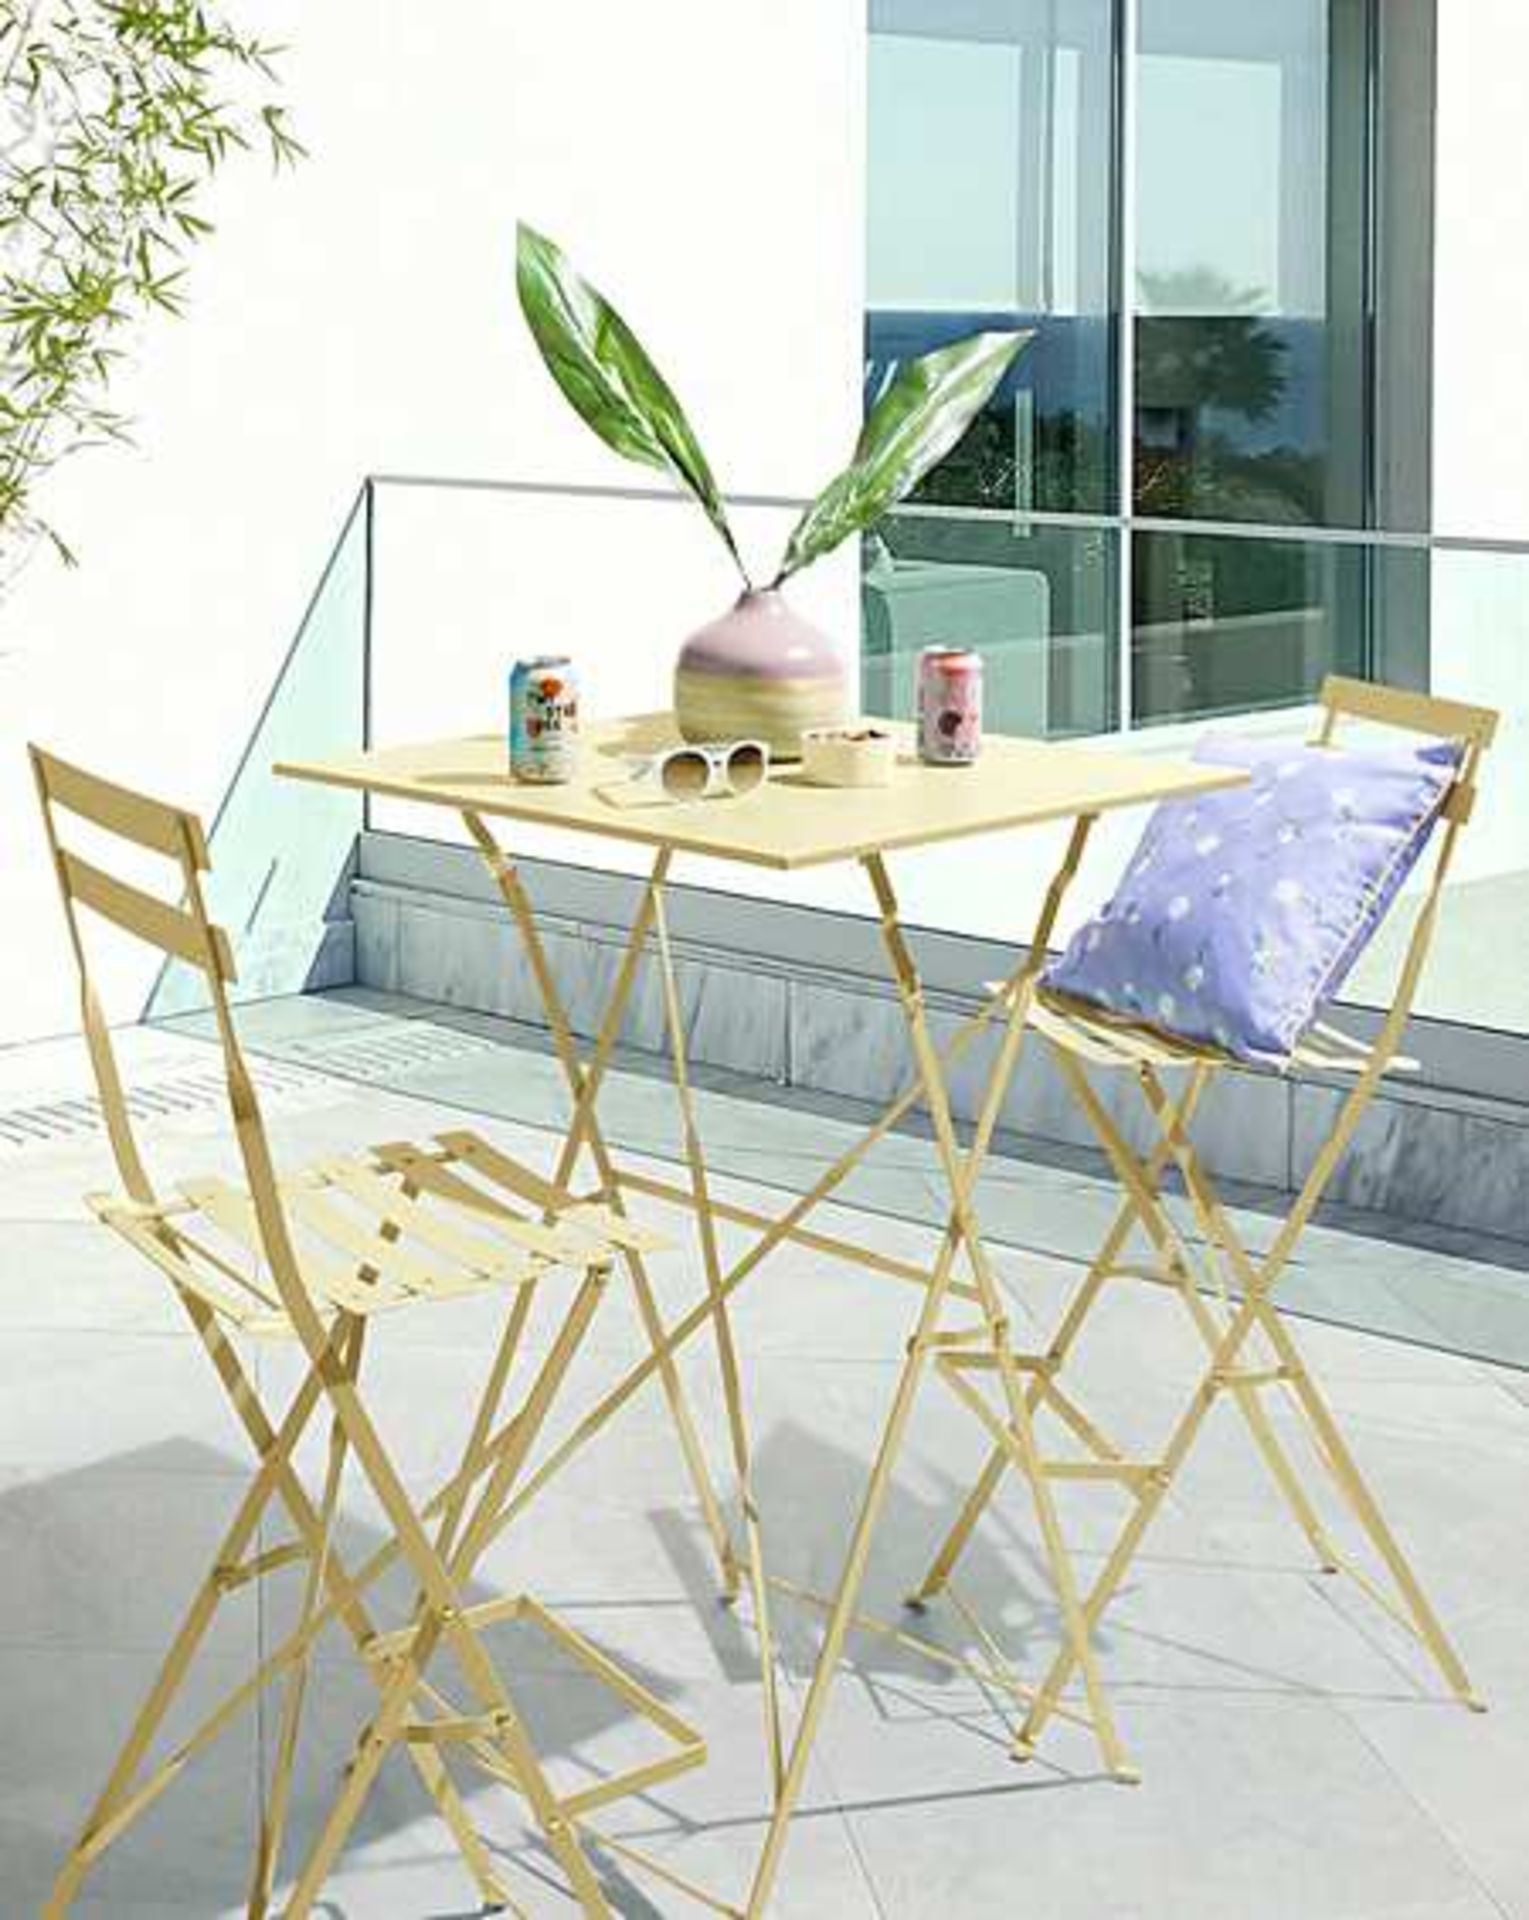 BRAND NEW Palma Bistro Bar Set - DUSK CITRON. RRP £199 EACH. Liven up your garden or balcony with